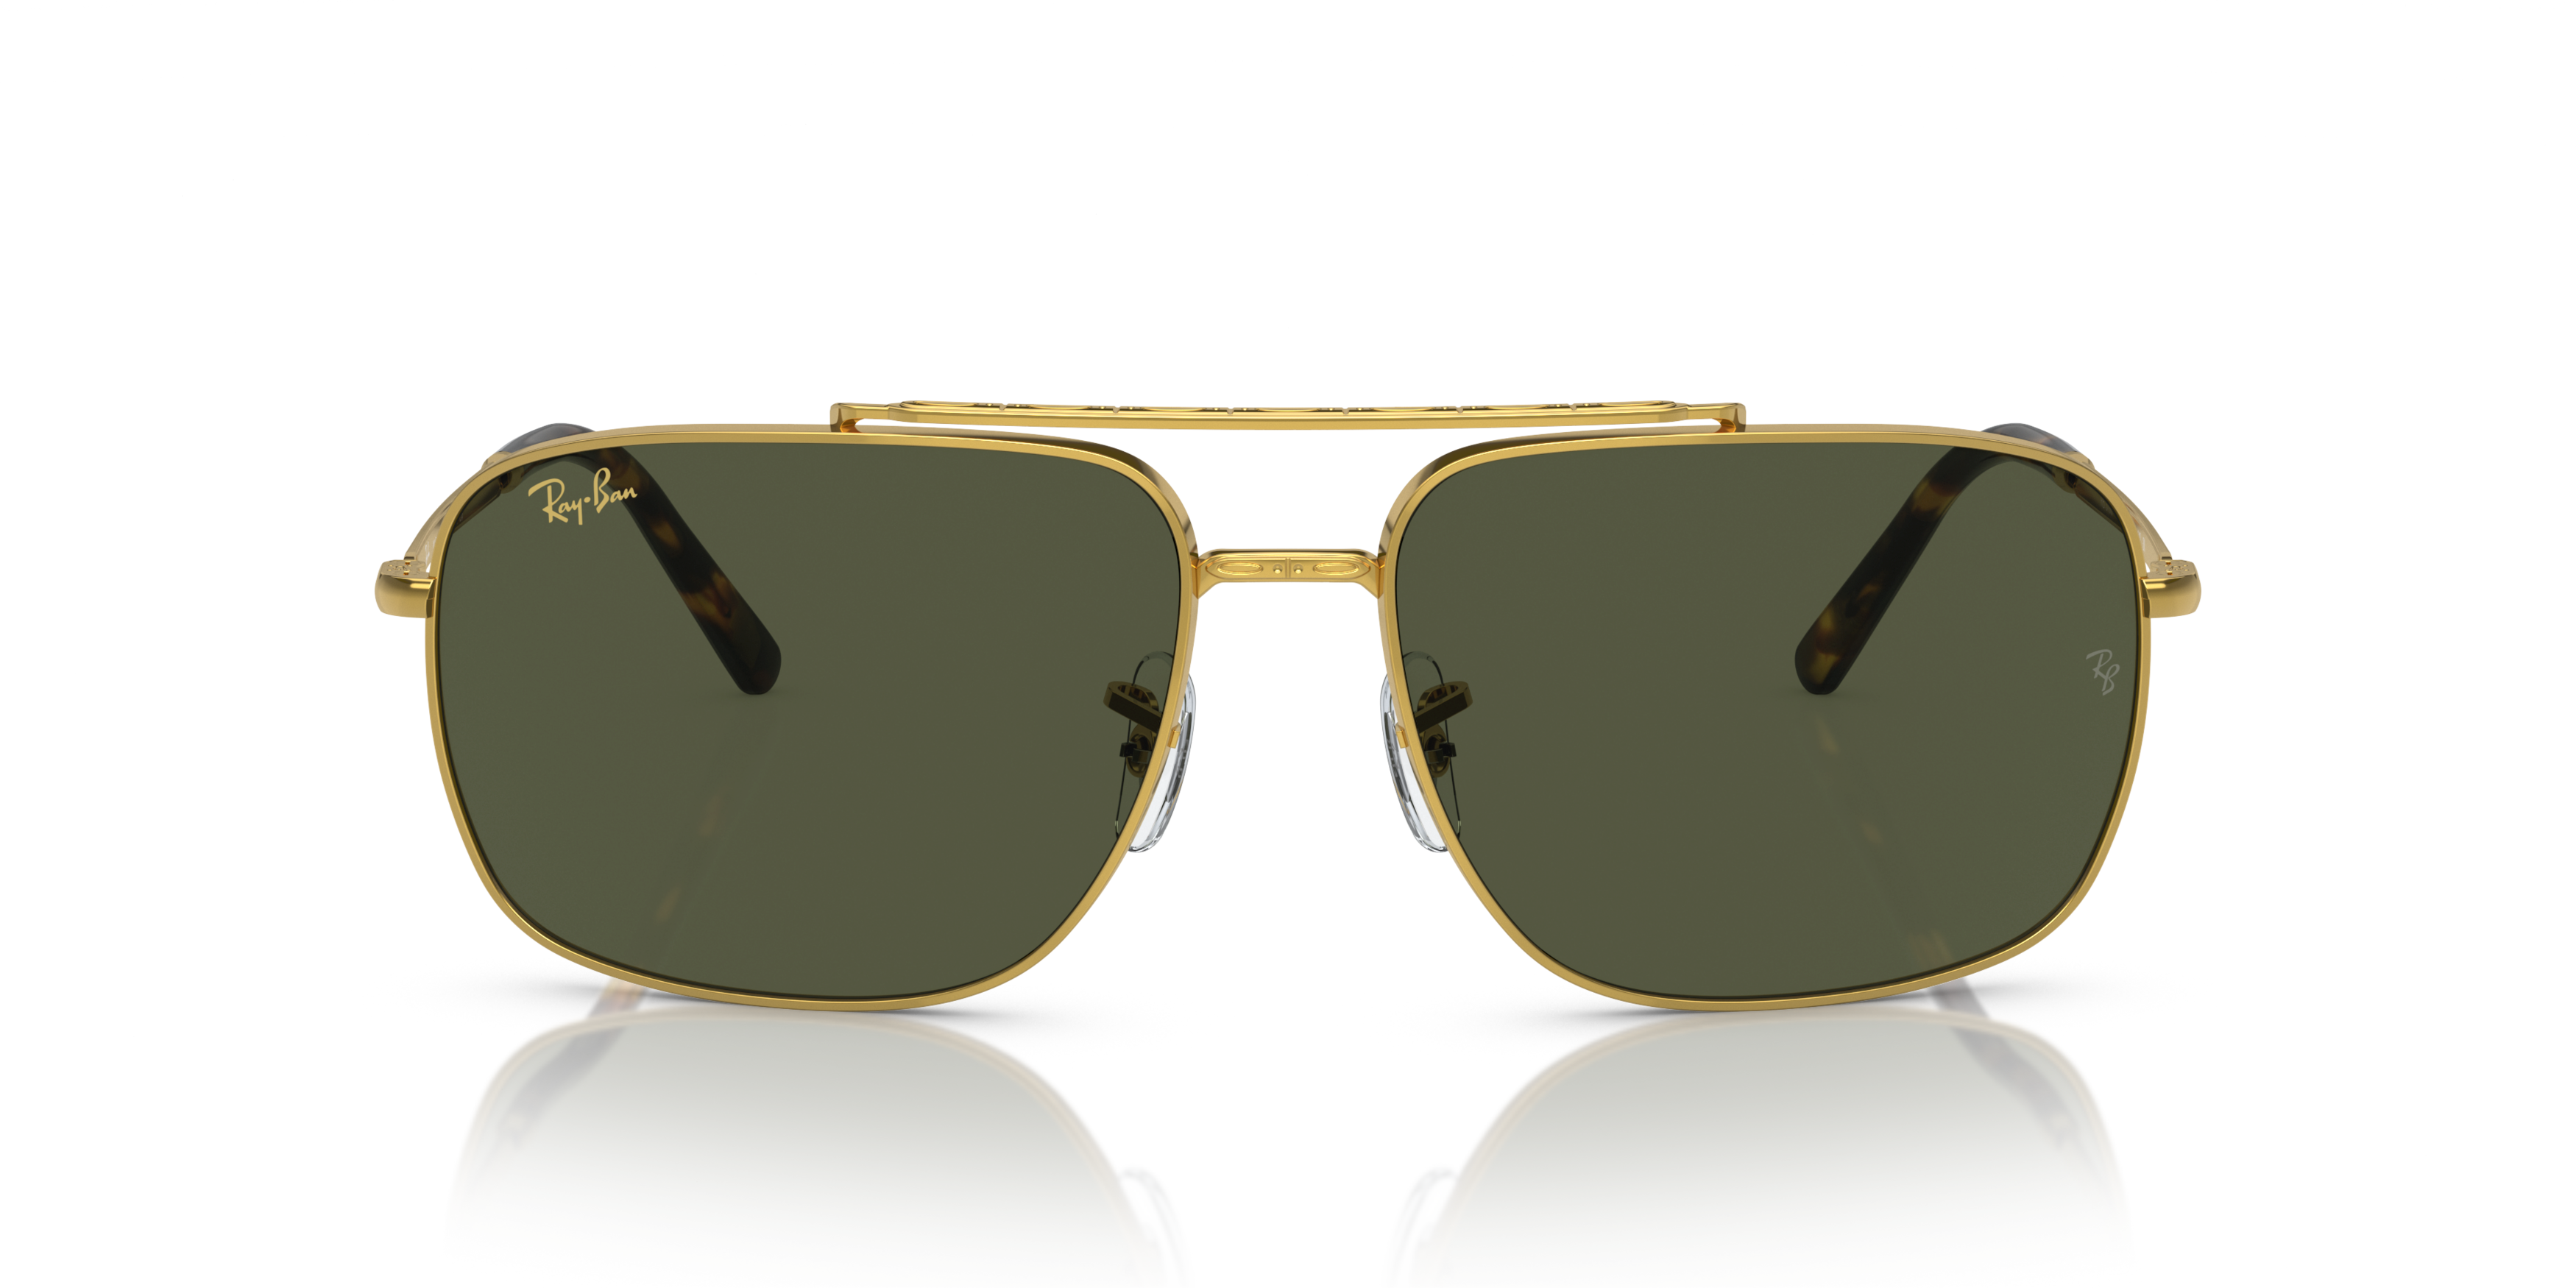 [products.image.front] Ray-Ban 0RB3796 919631